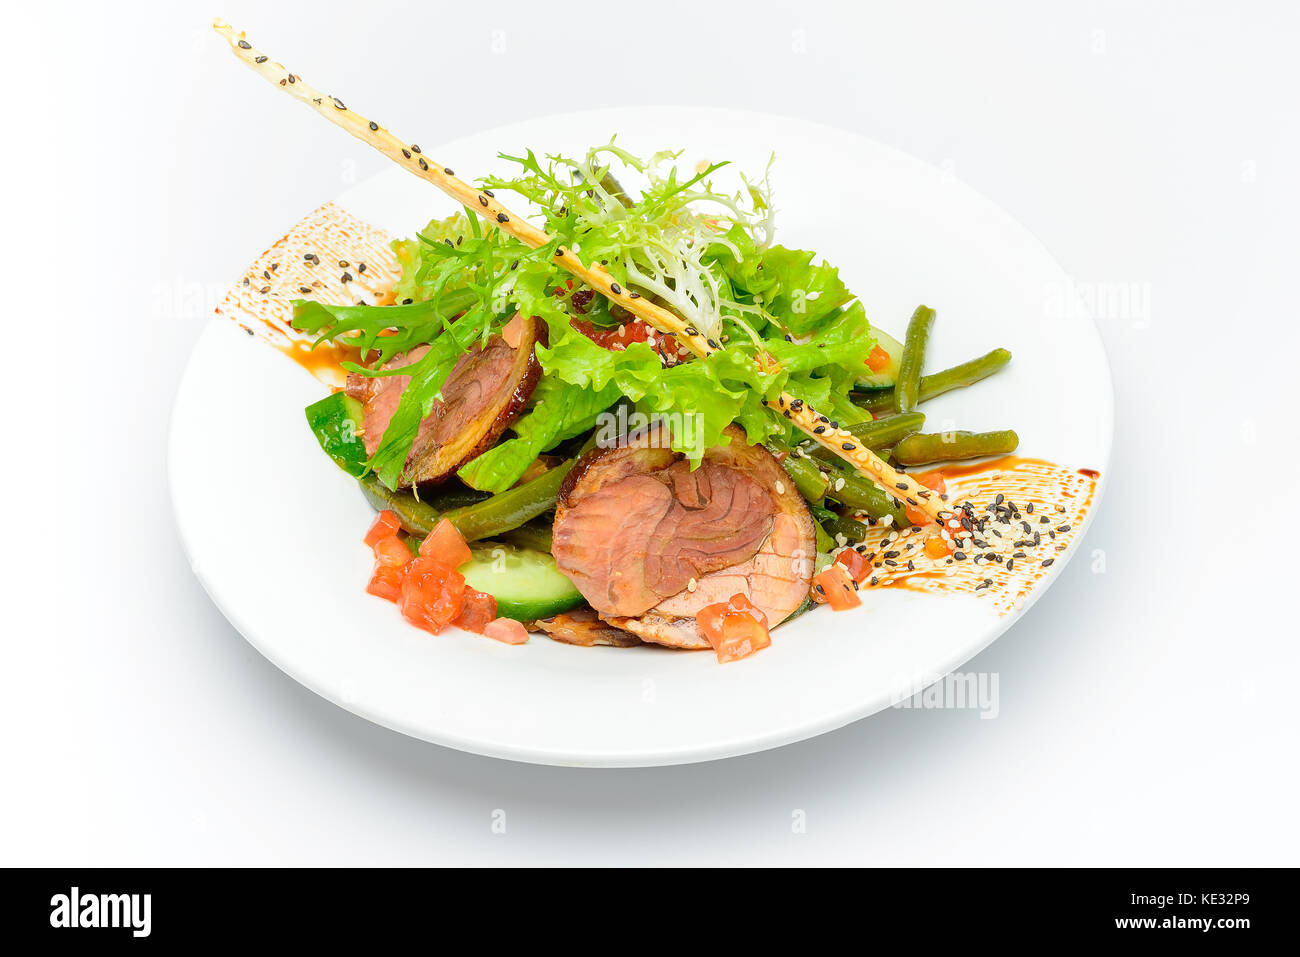 Fresh cut meat slices decorated witn salad, cucumber, tomatoes Stock Photo